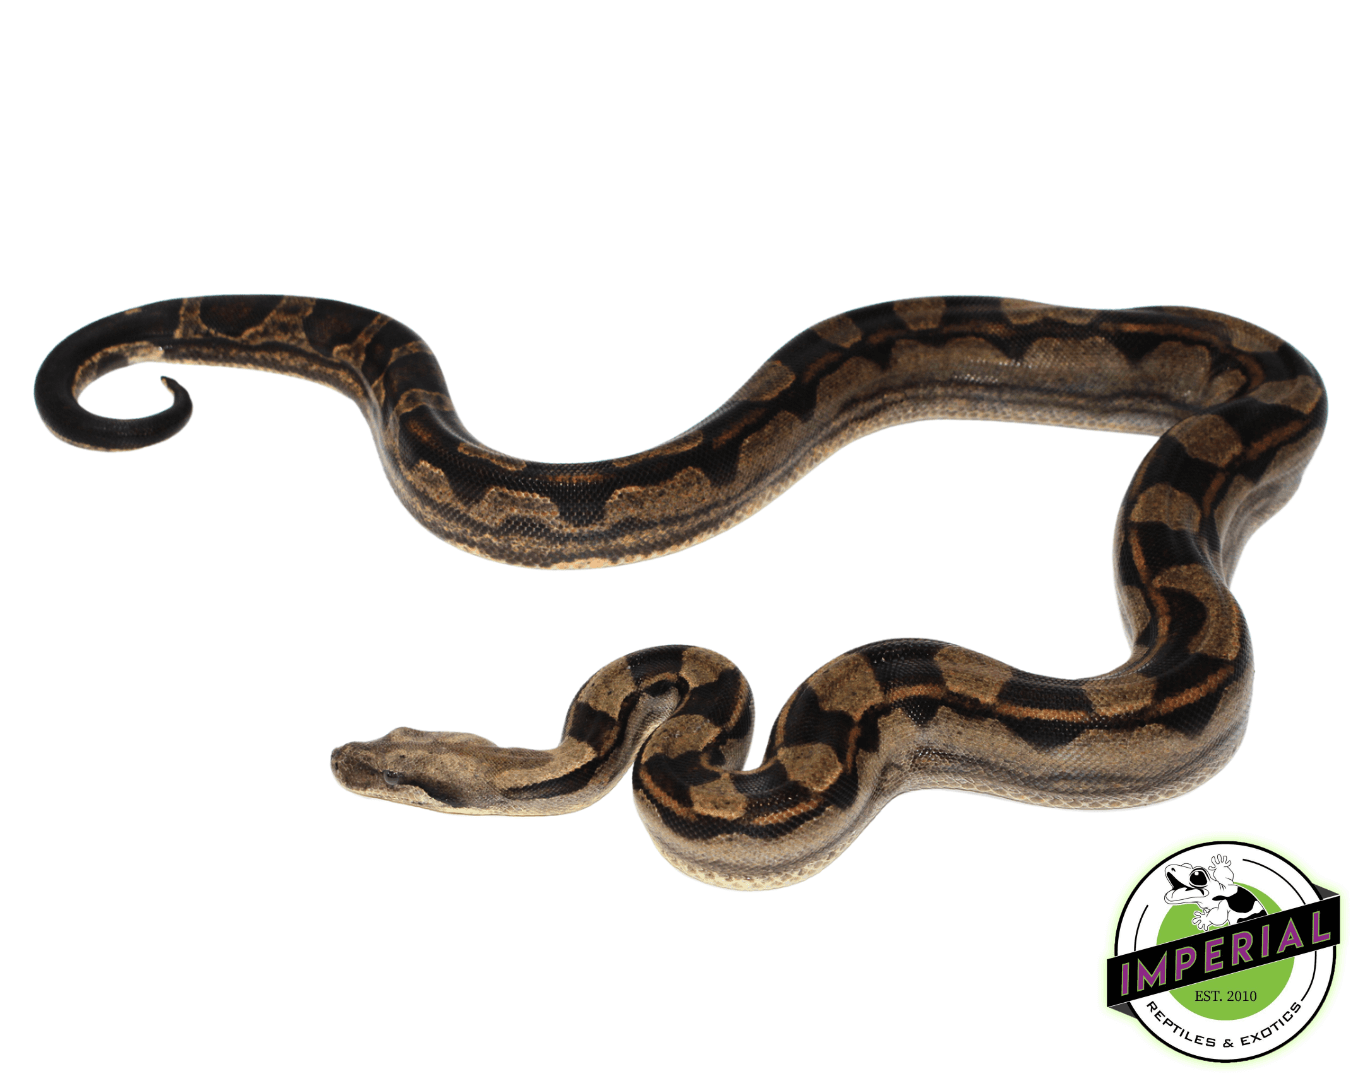 motley colombian boa constrictor for sale, buy reptiles online